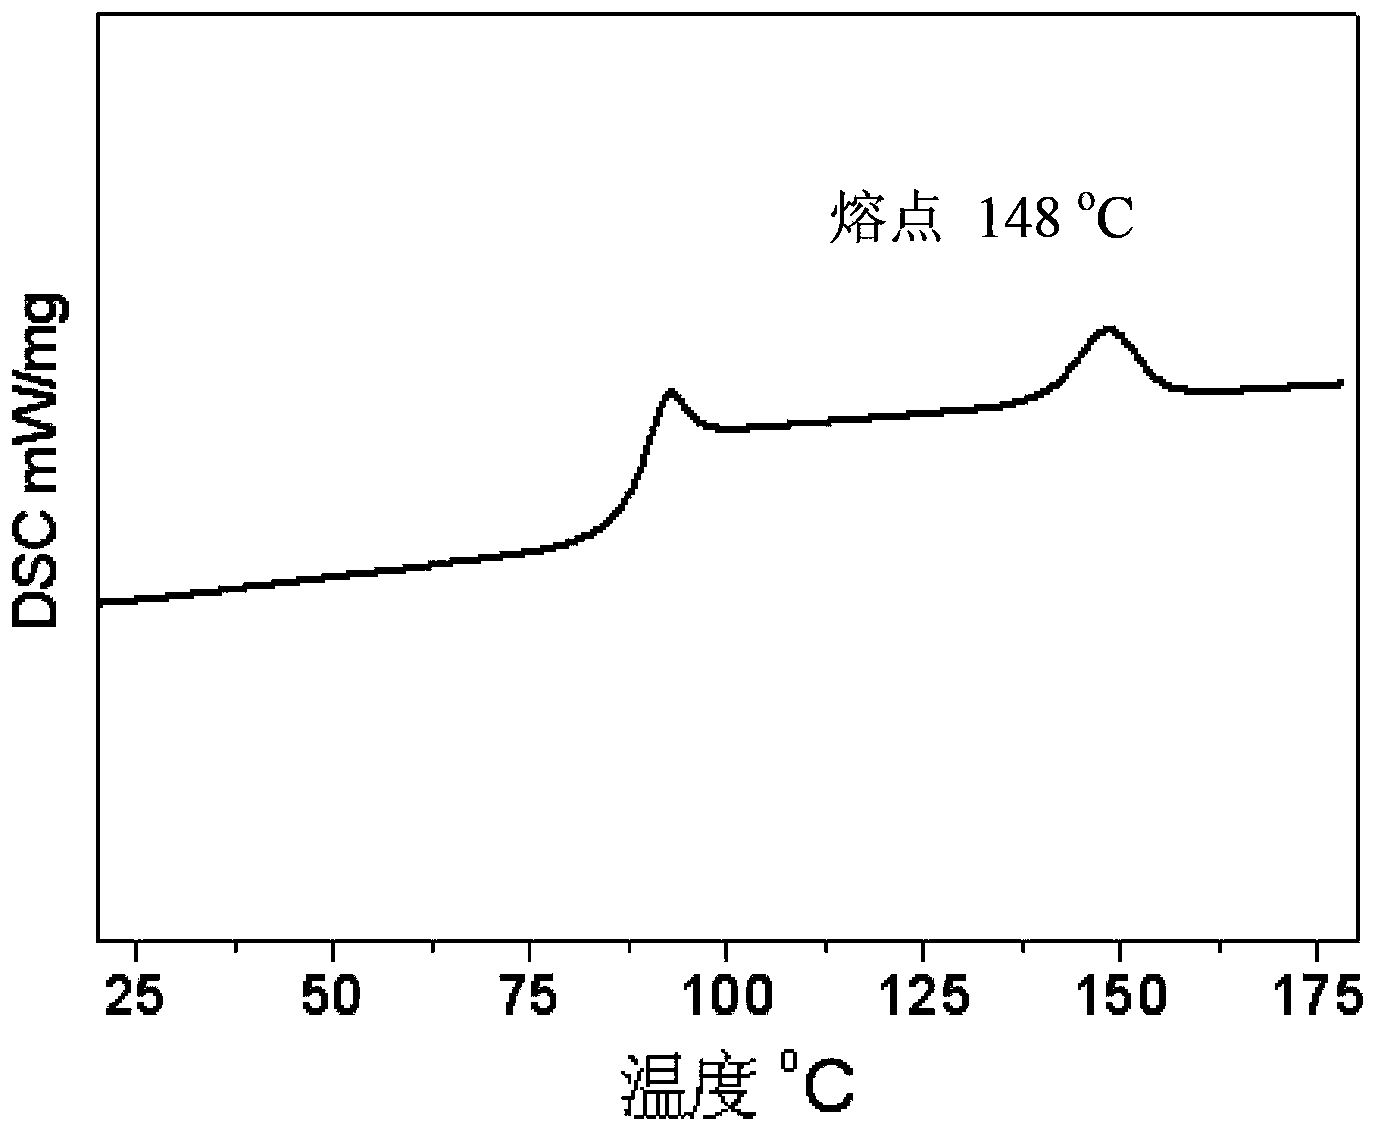 Carbon dioxide based high polymer material with crystallization performance